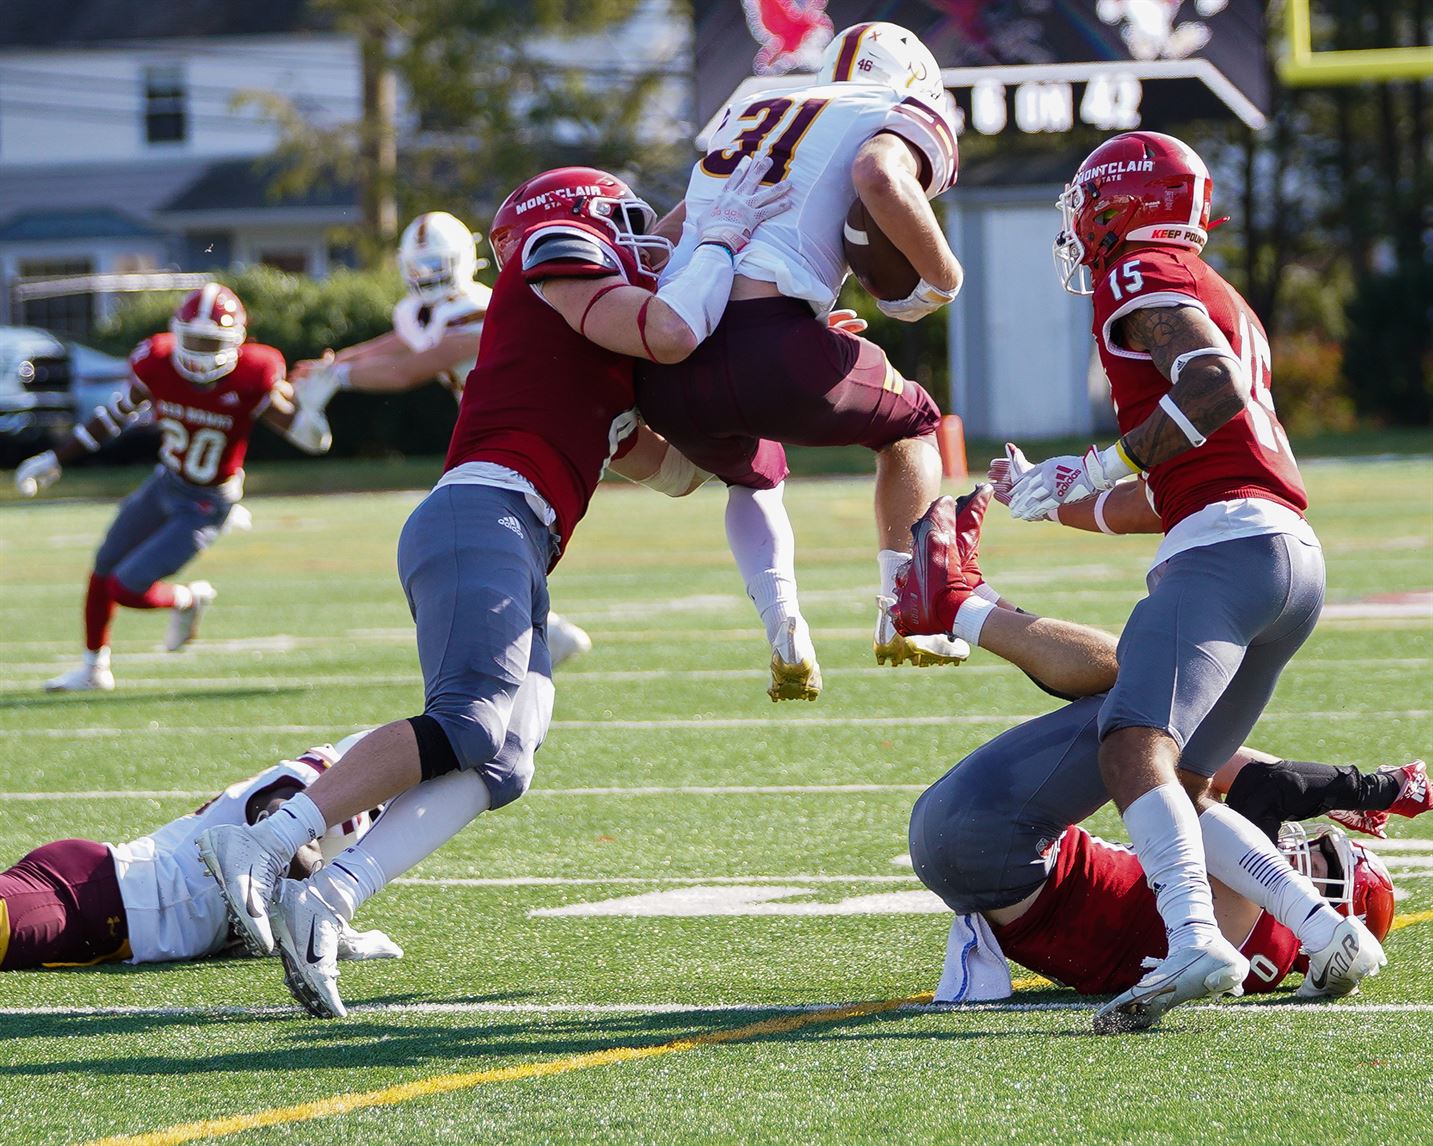 A Salisbury player leaps over a Montclair State defender.